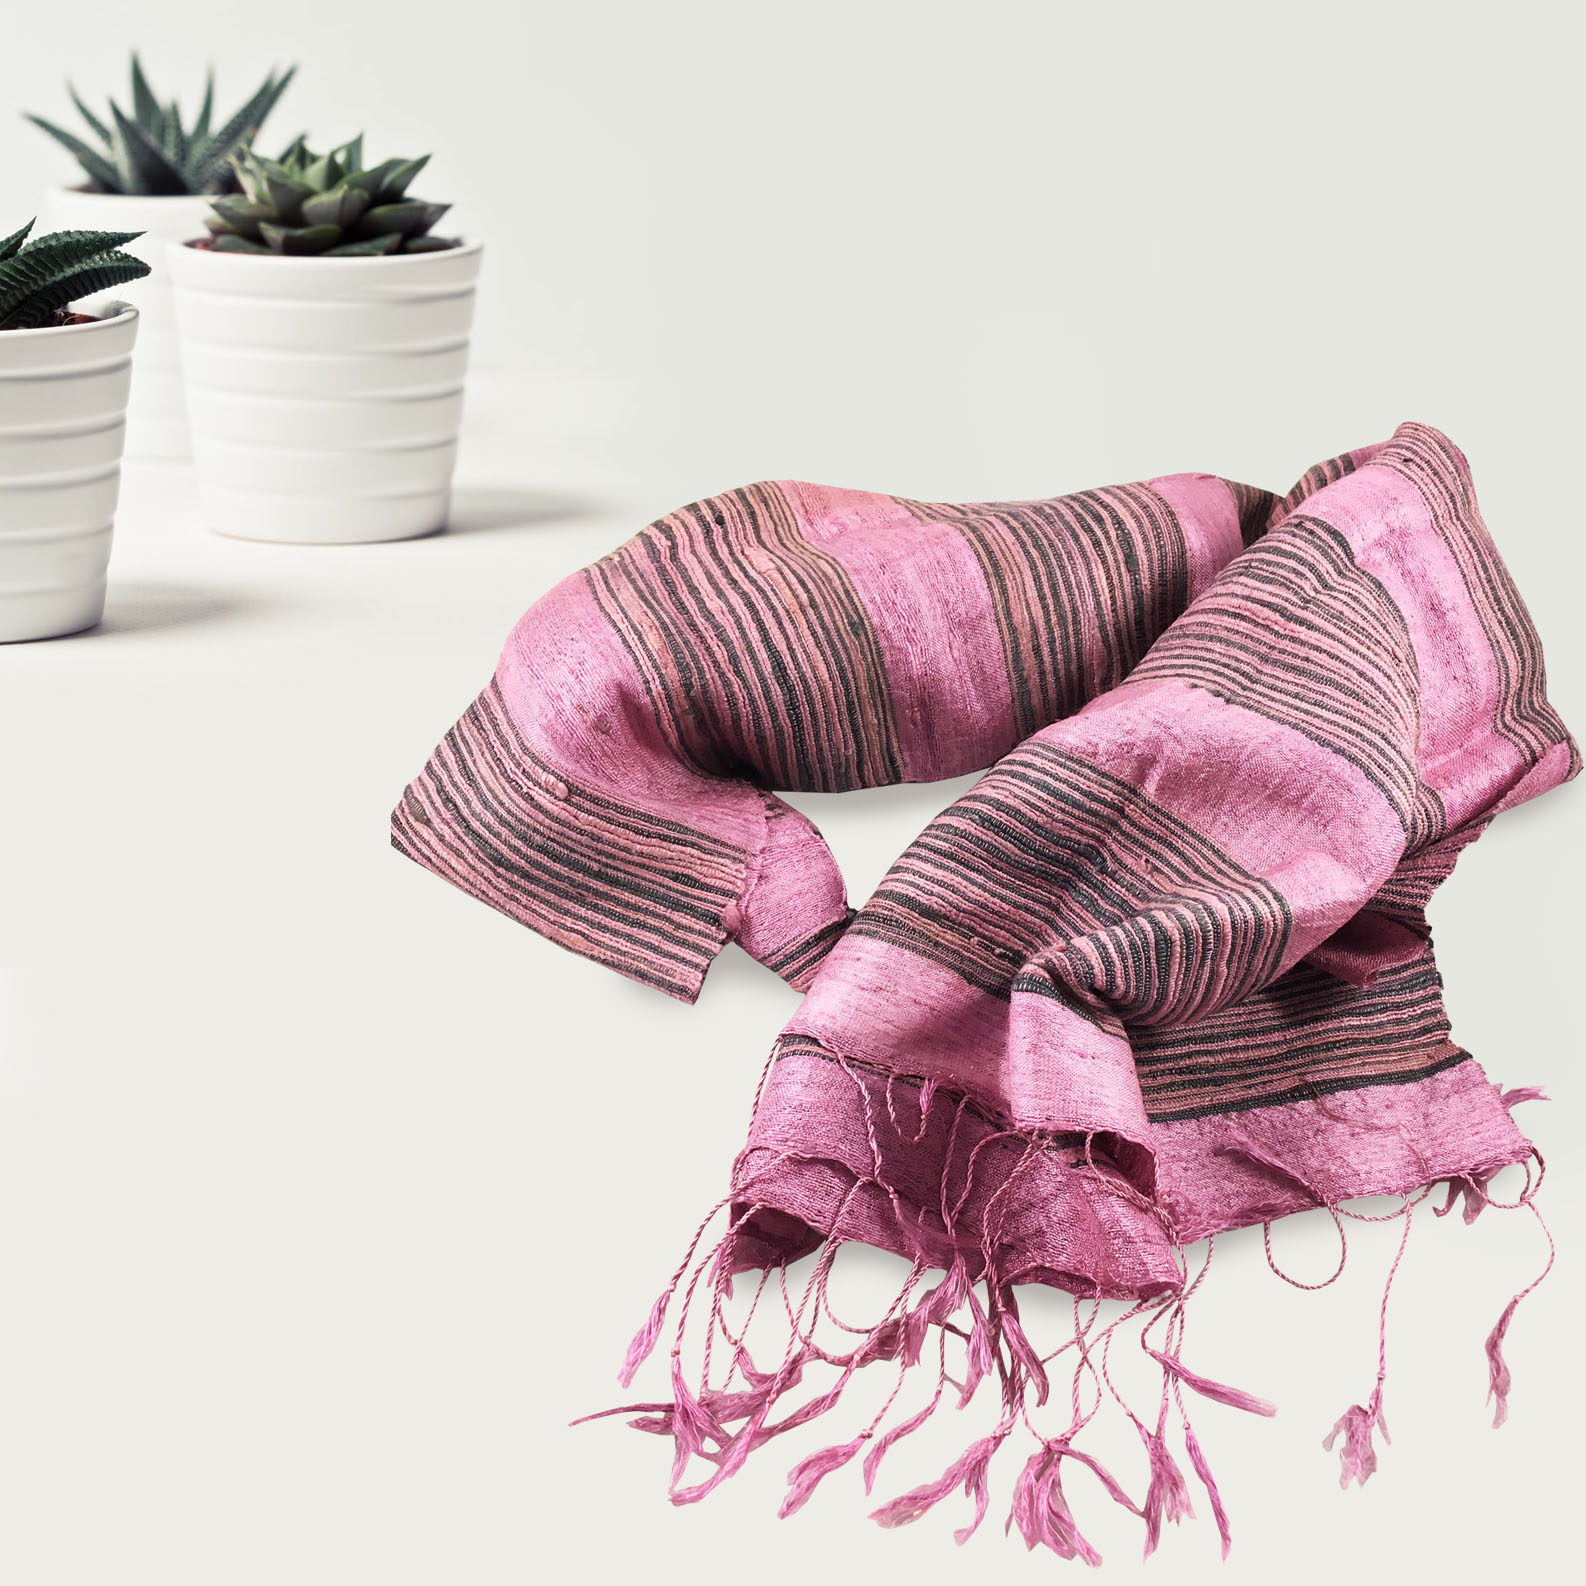 Hand-woven Thai silk scarf available in more options